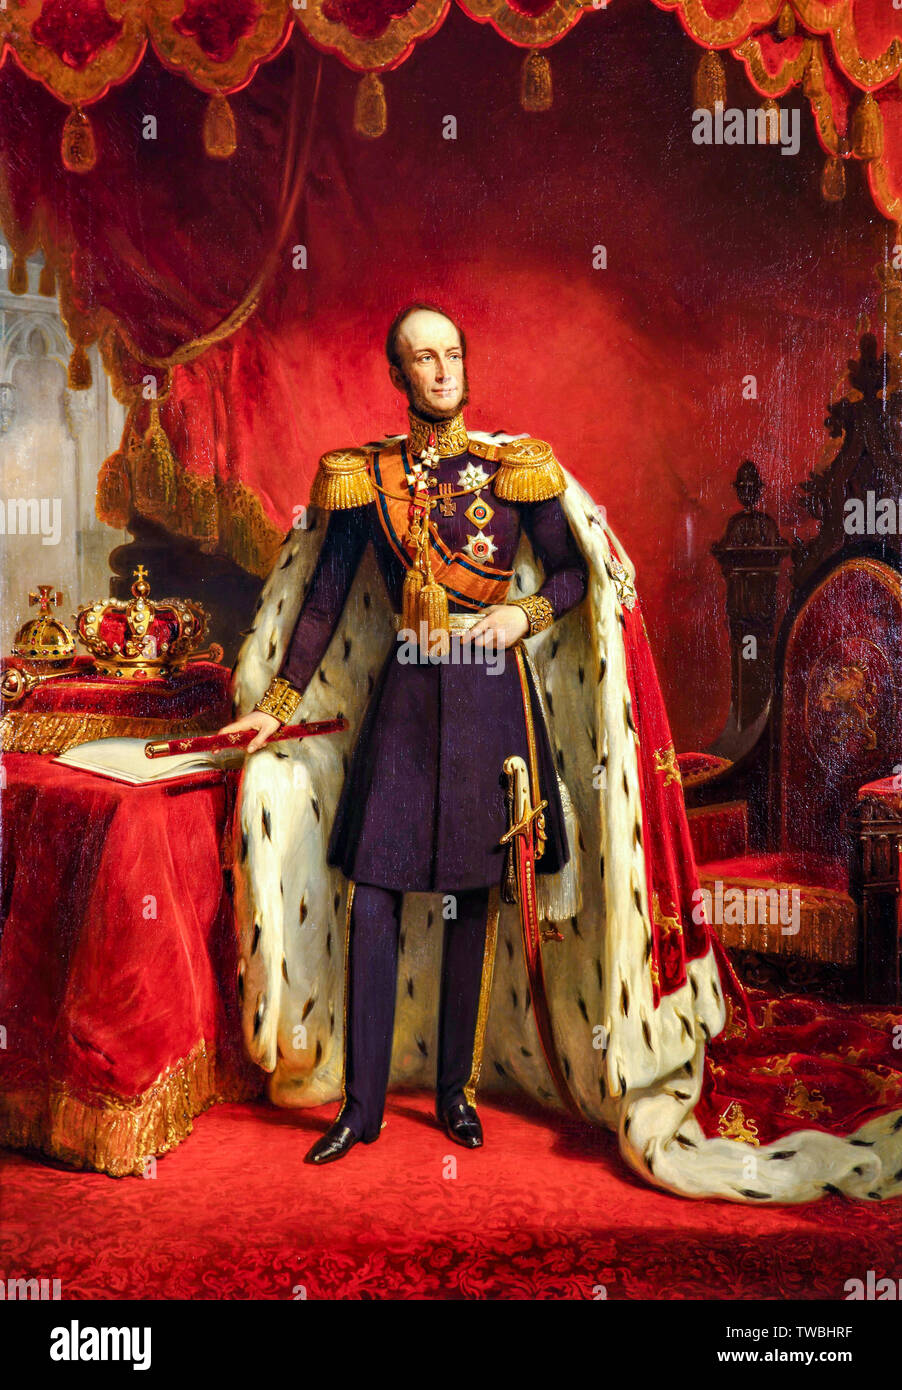 King William II of the Netherlands (1792-1849), portrait painting, 1849 Stock Photo